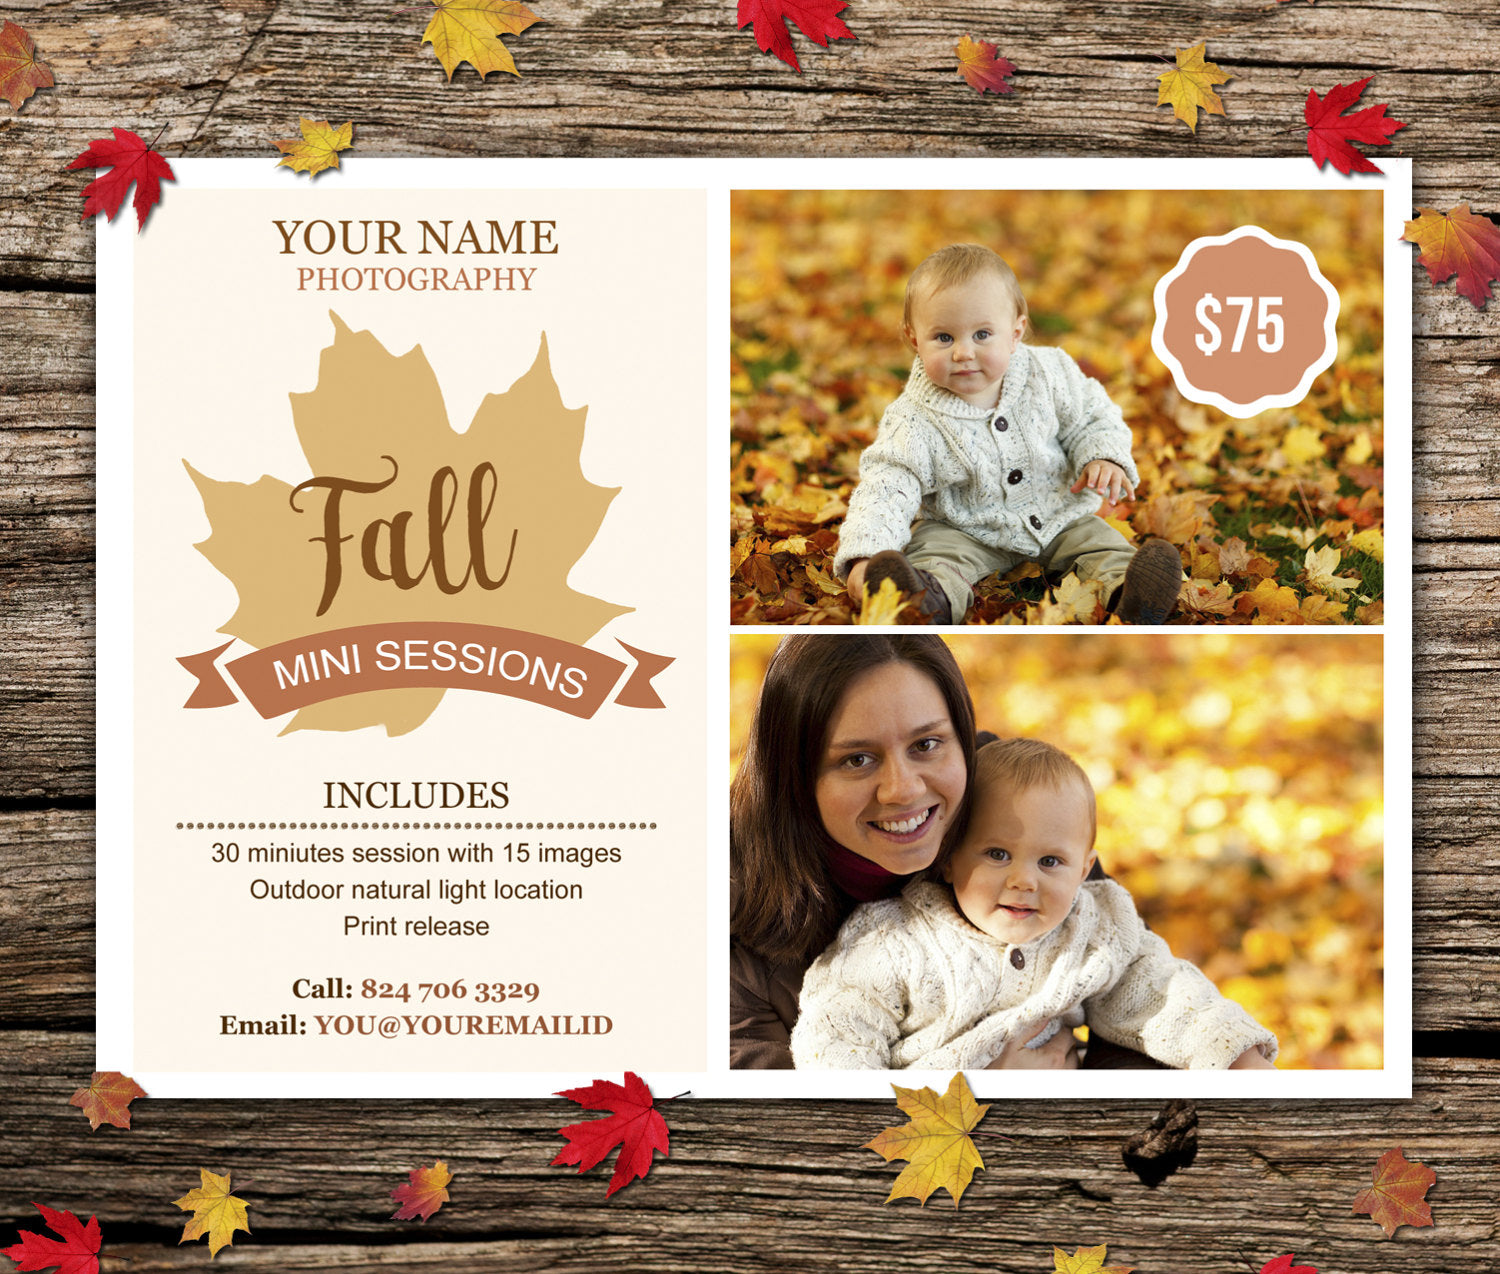 Fall marketing template - Photography mini session template - Autumn mini session - Photography marketing board - INSTANT DOWNLOAD